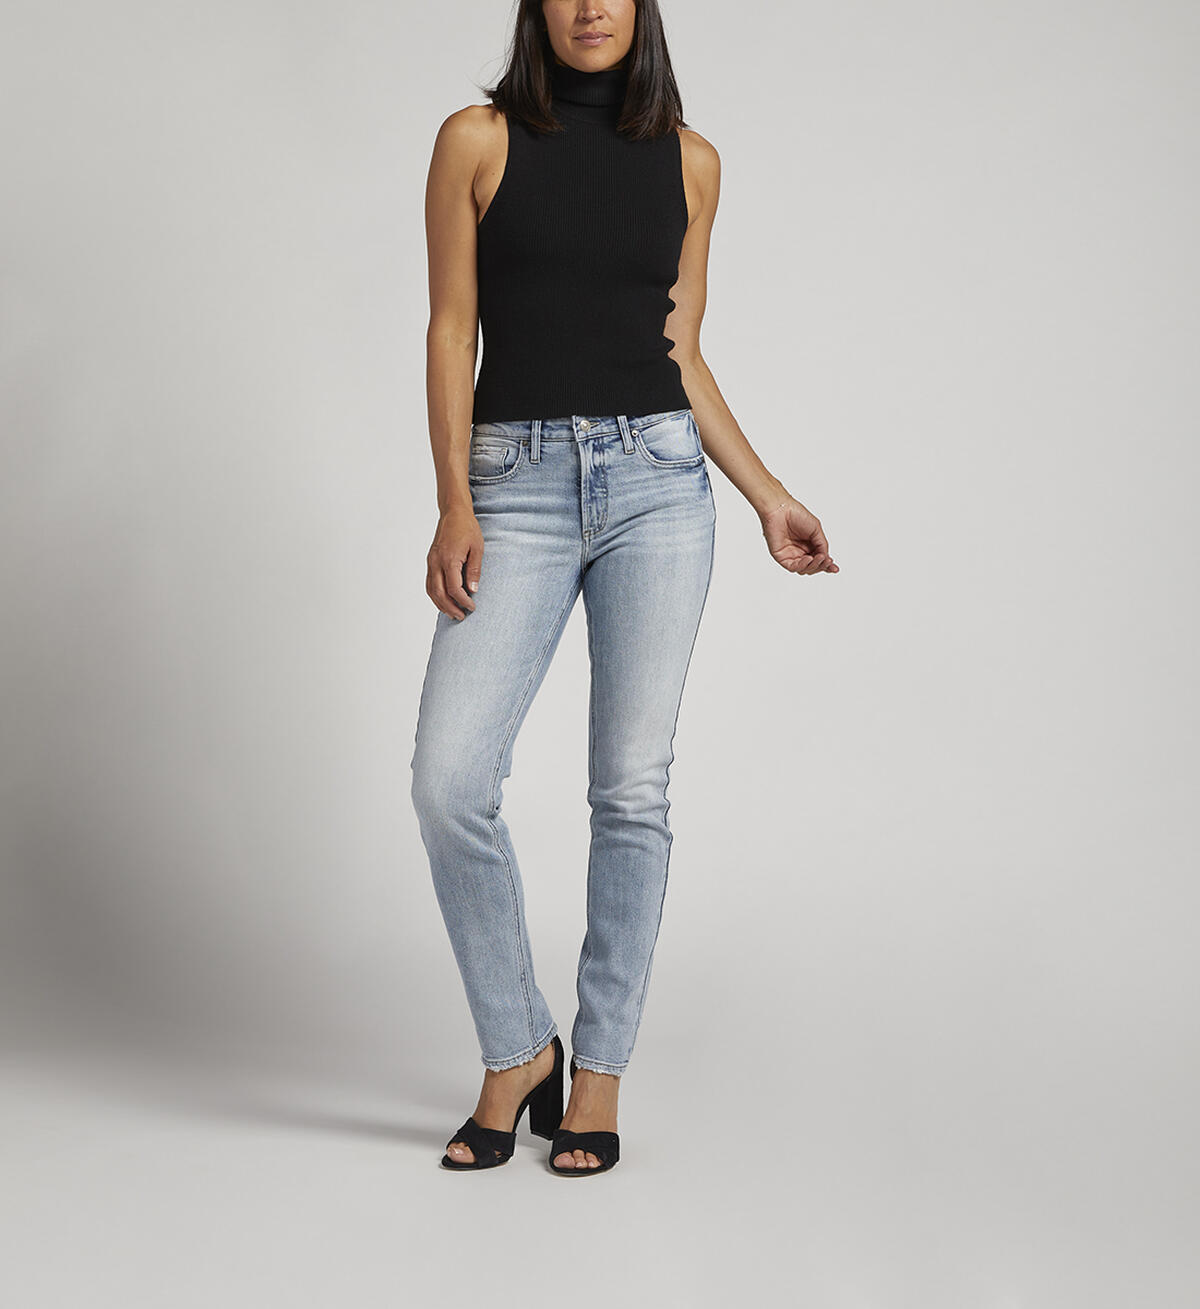 Most Wanted Mid Rise Straight Leg Jeans, Indigo, hi-res image number 0